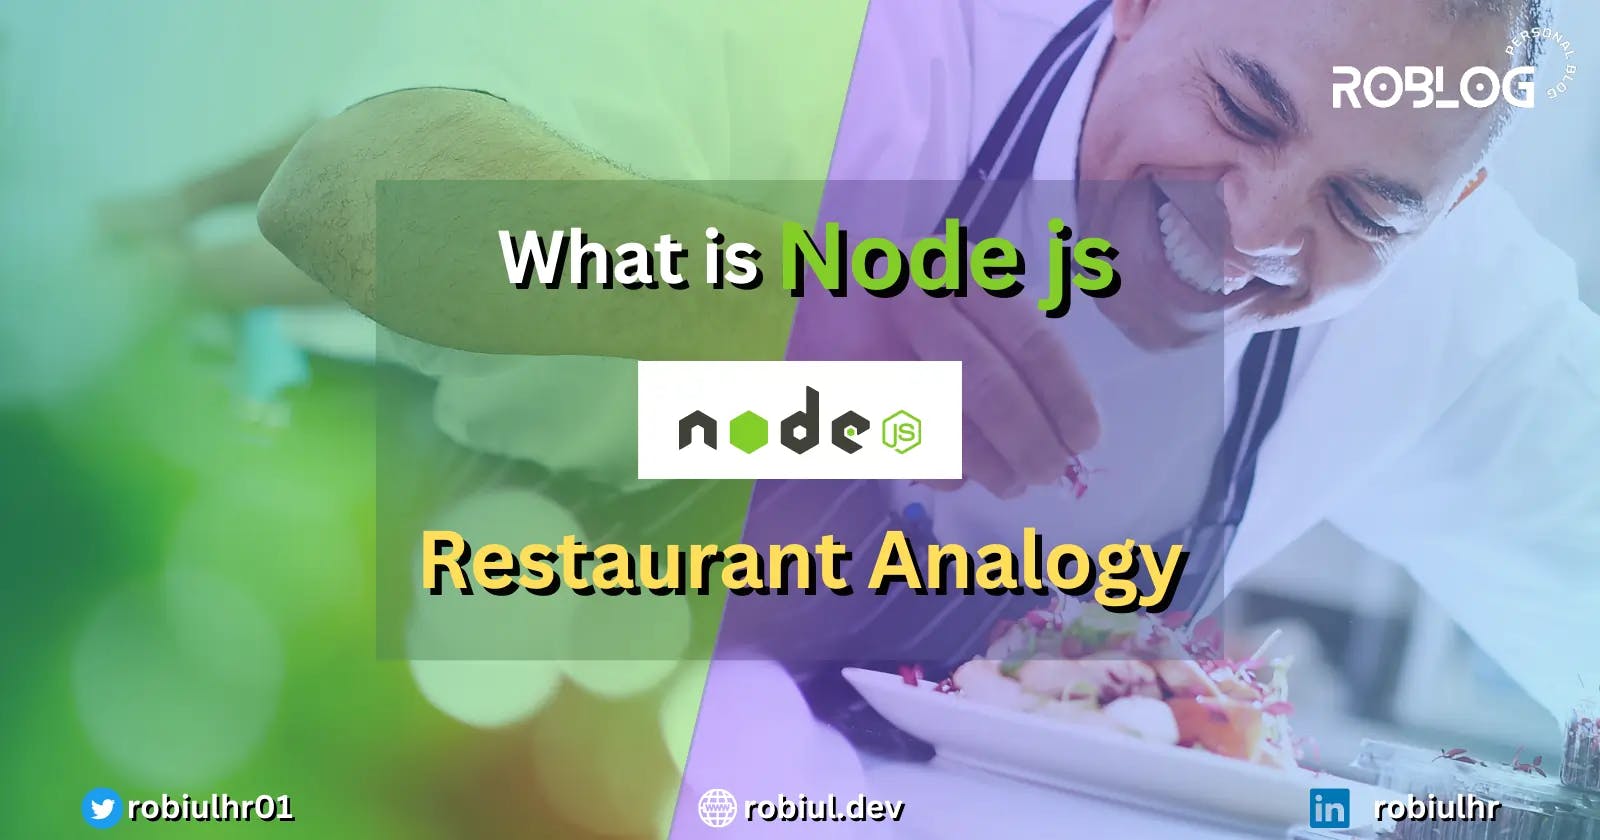 What is Node js? - Restaurant Analogy